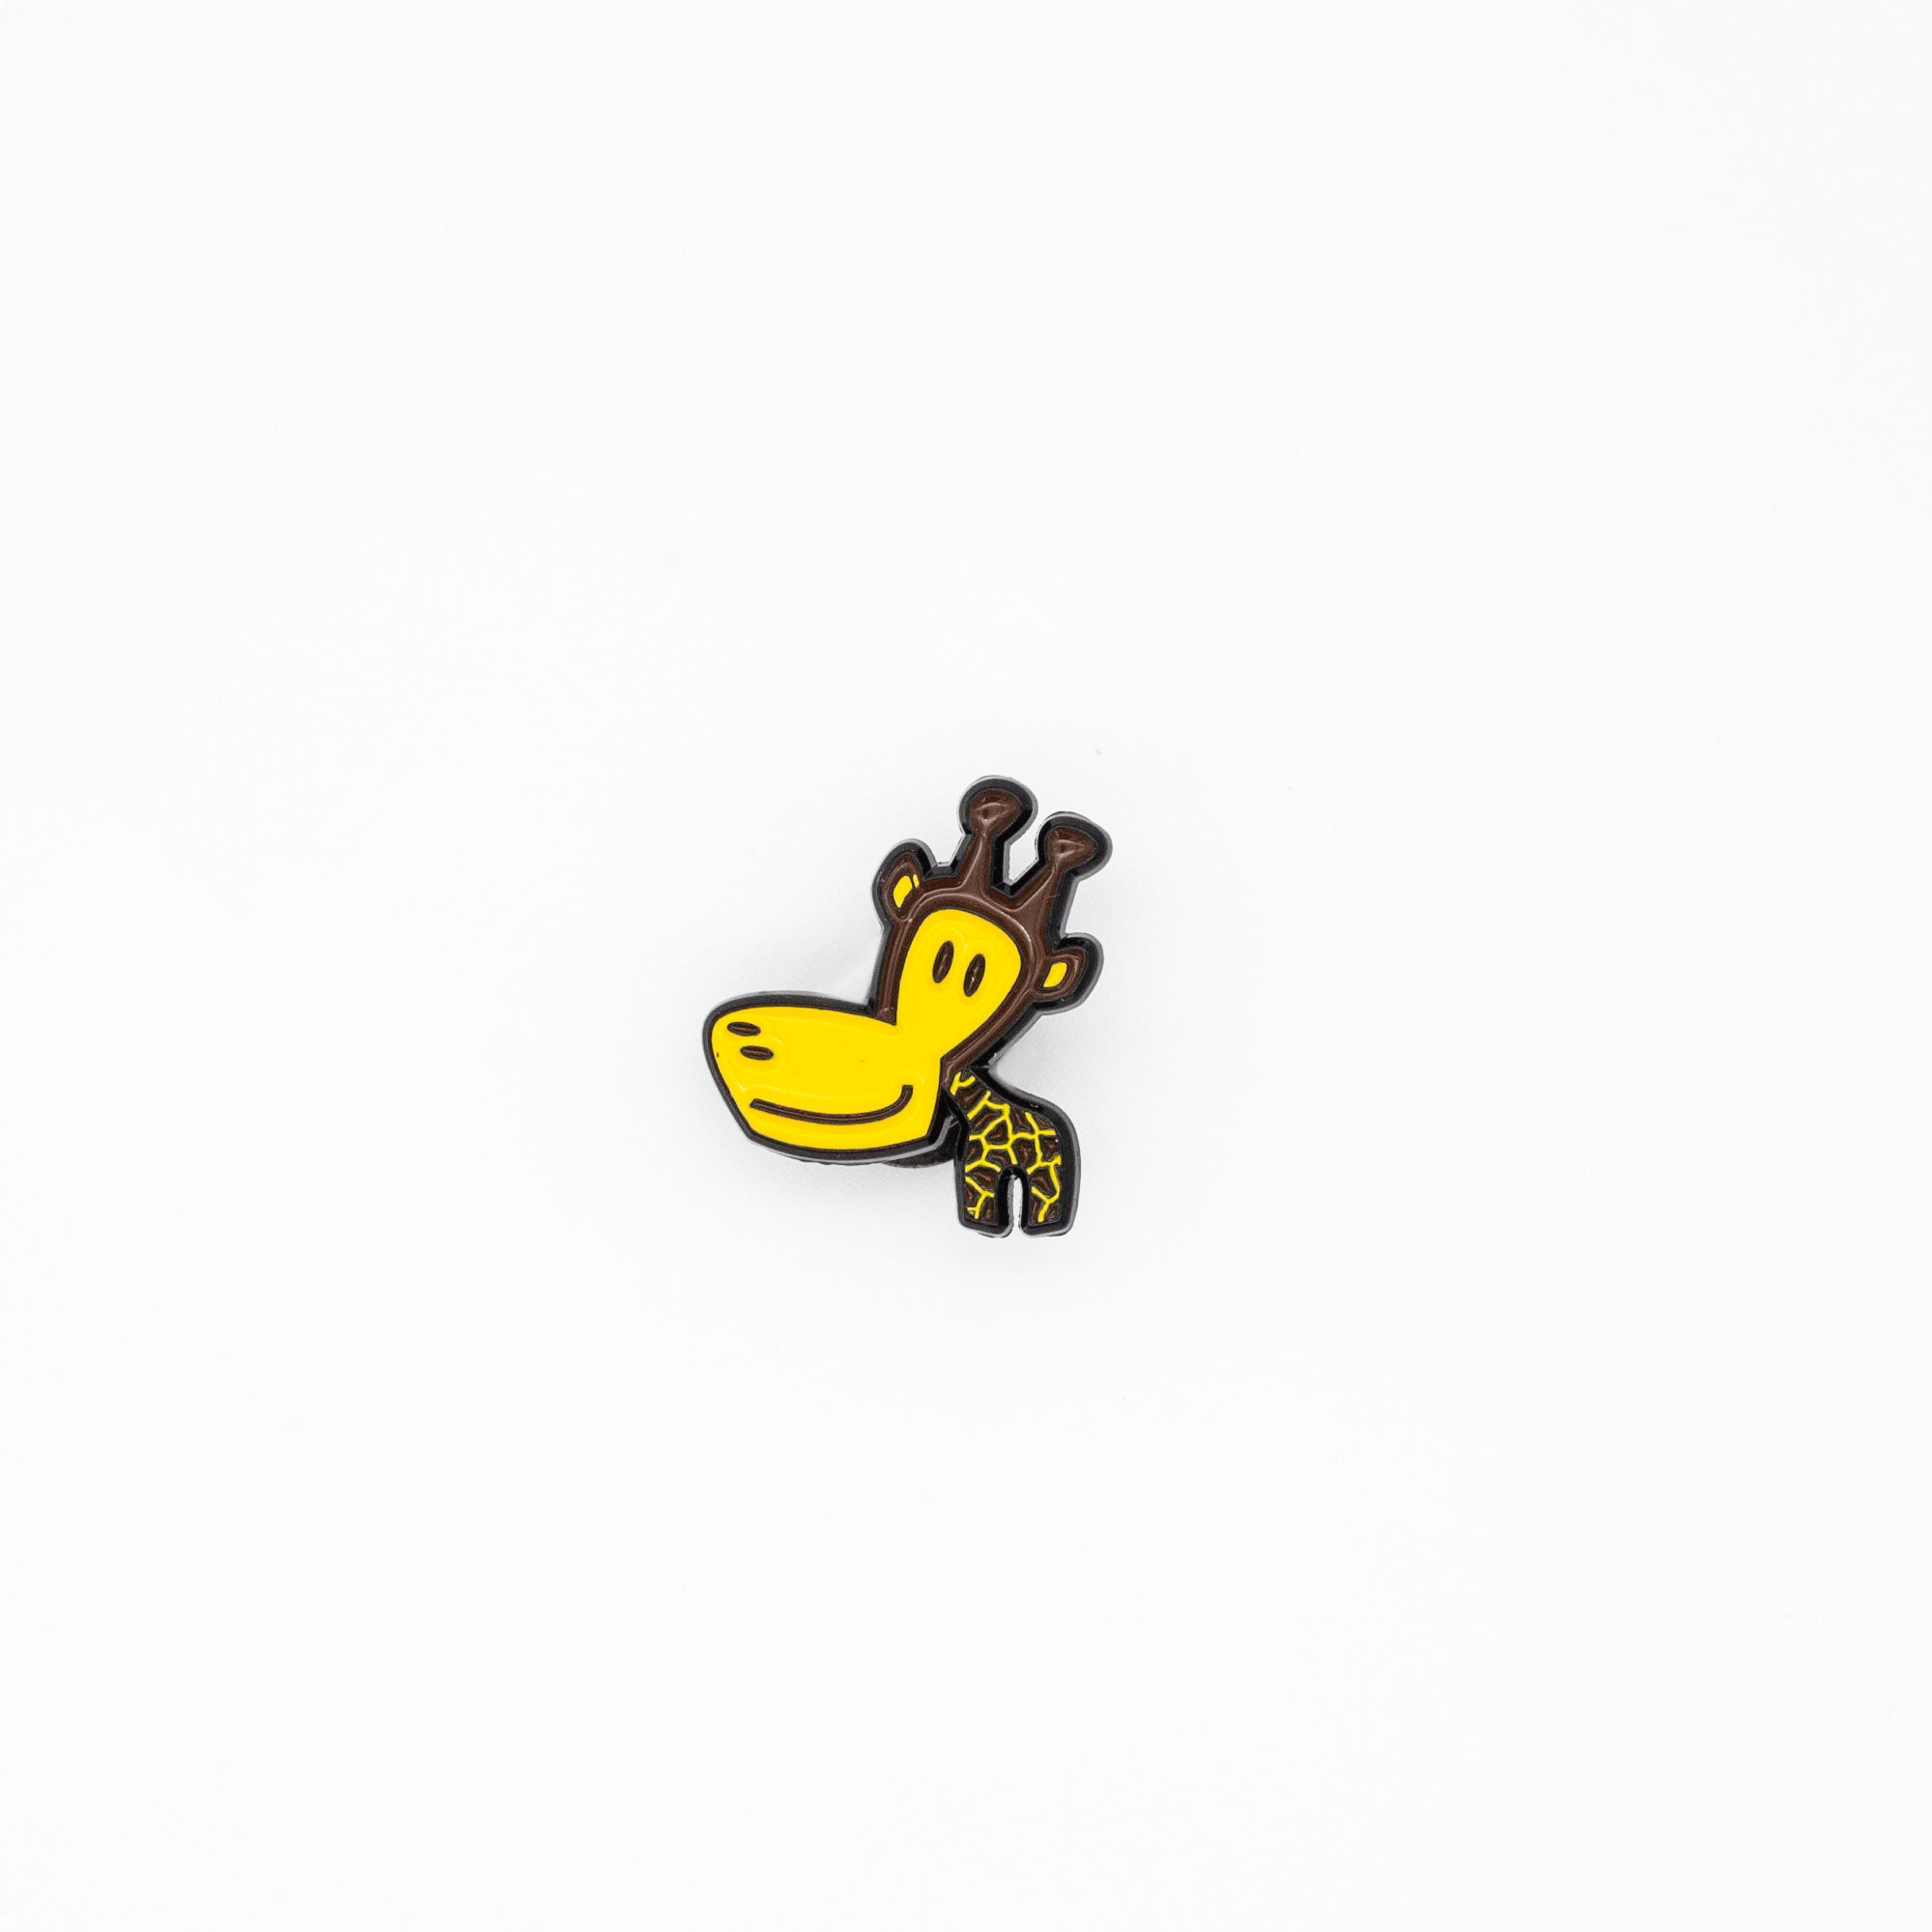 small brown and yellow giraffe pin on white background